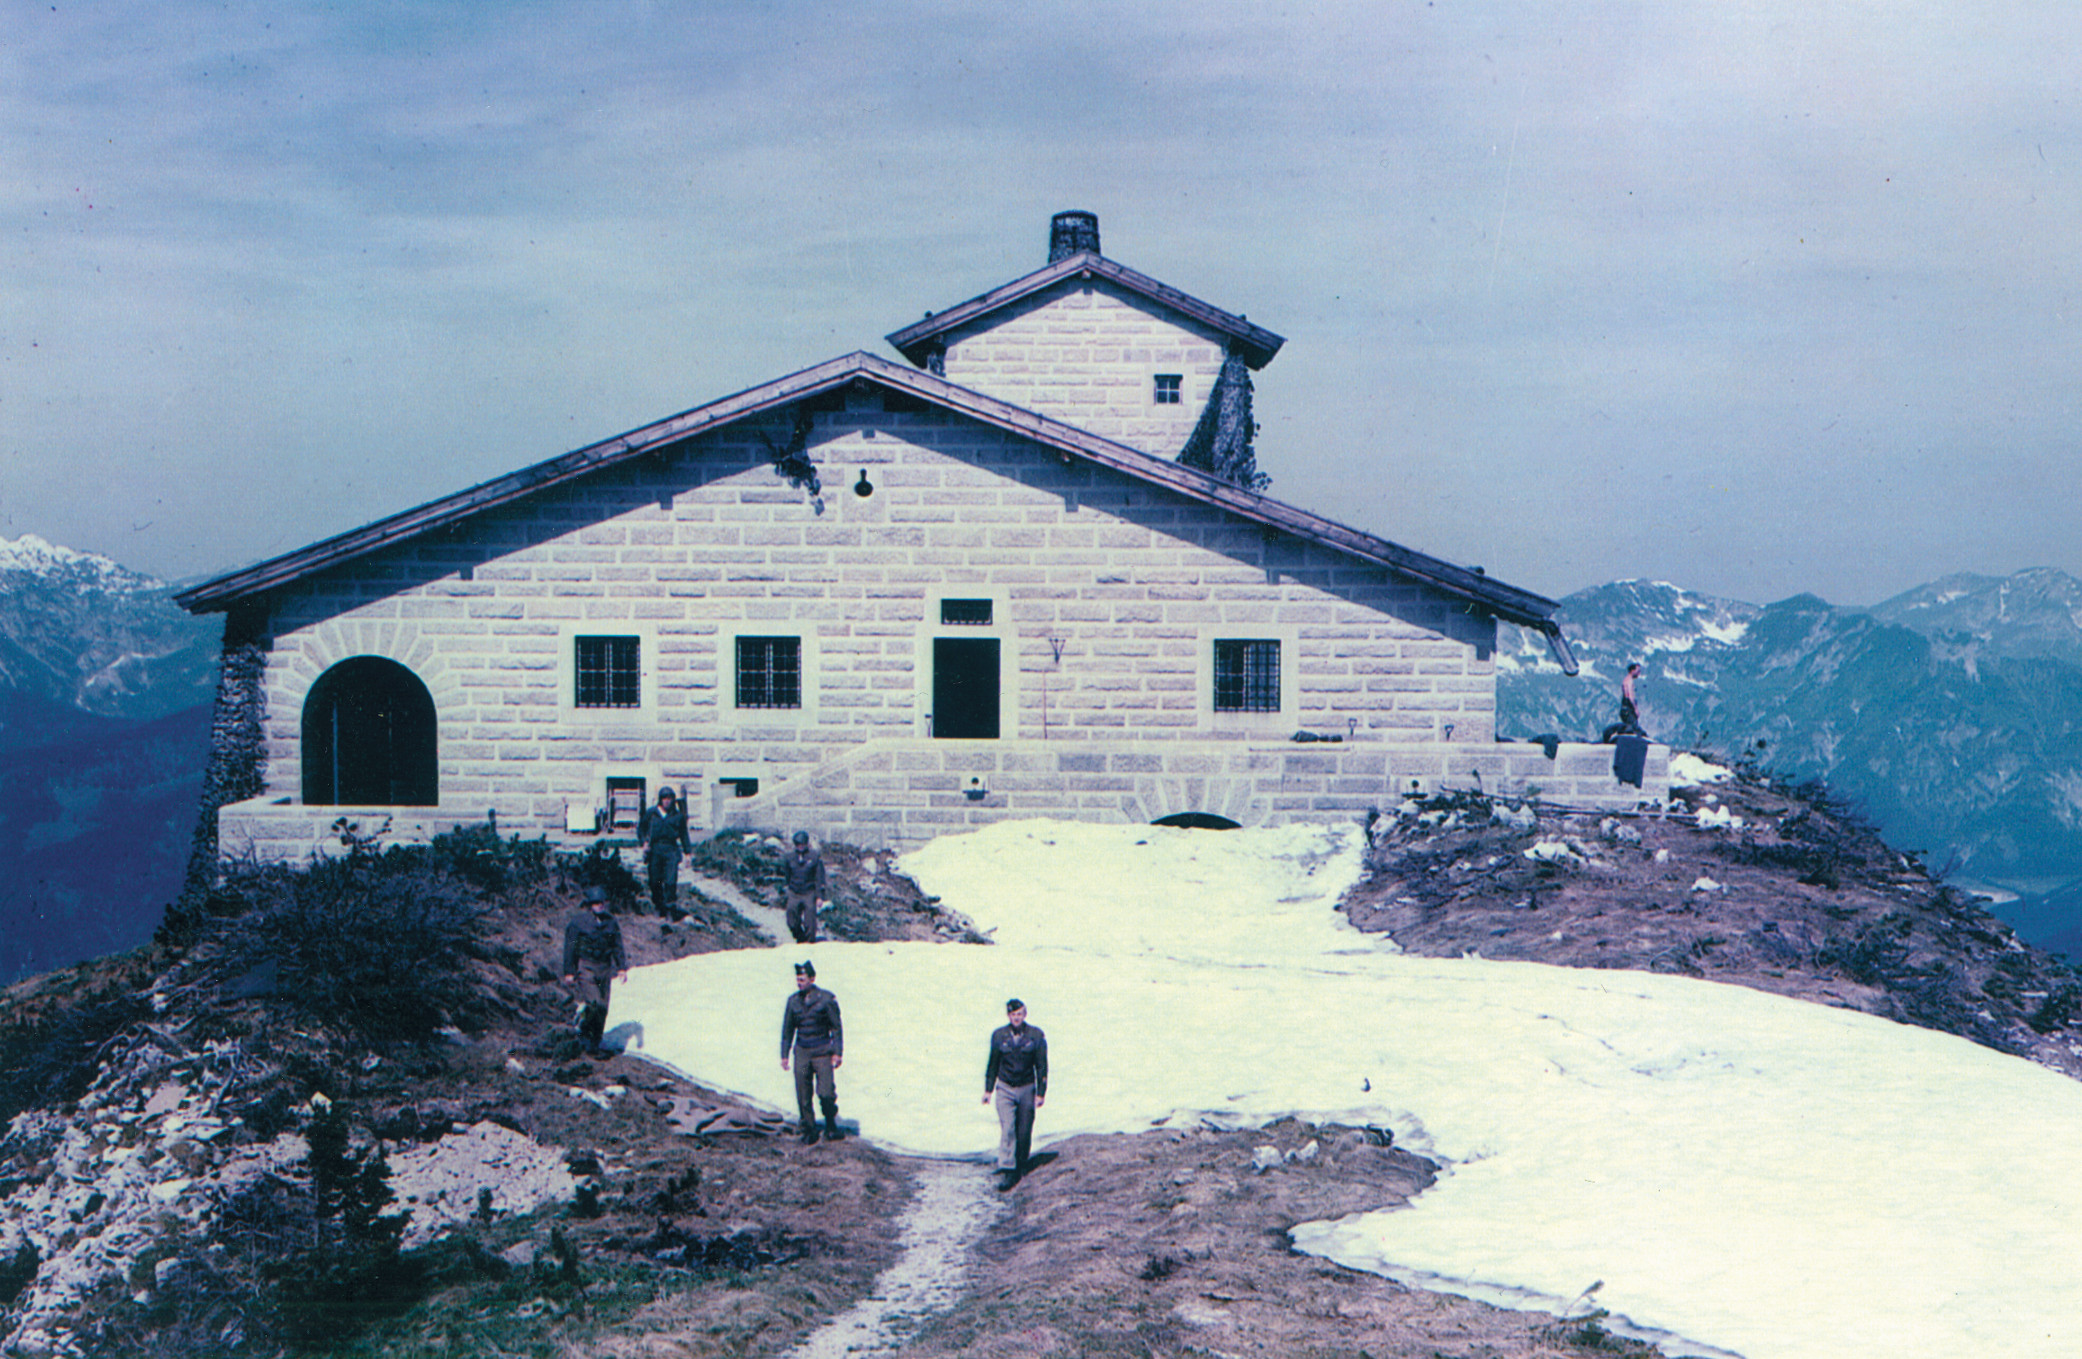 Hitler’s Eagle’s Nest offered panoramic views of the Alpine countryside. An attempt to assassinate the Nazi leader failed; however, the Führer committed suicide days later.